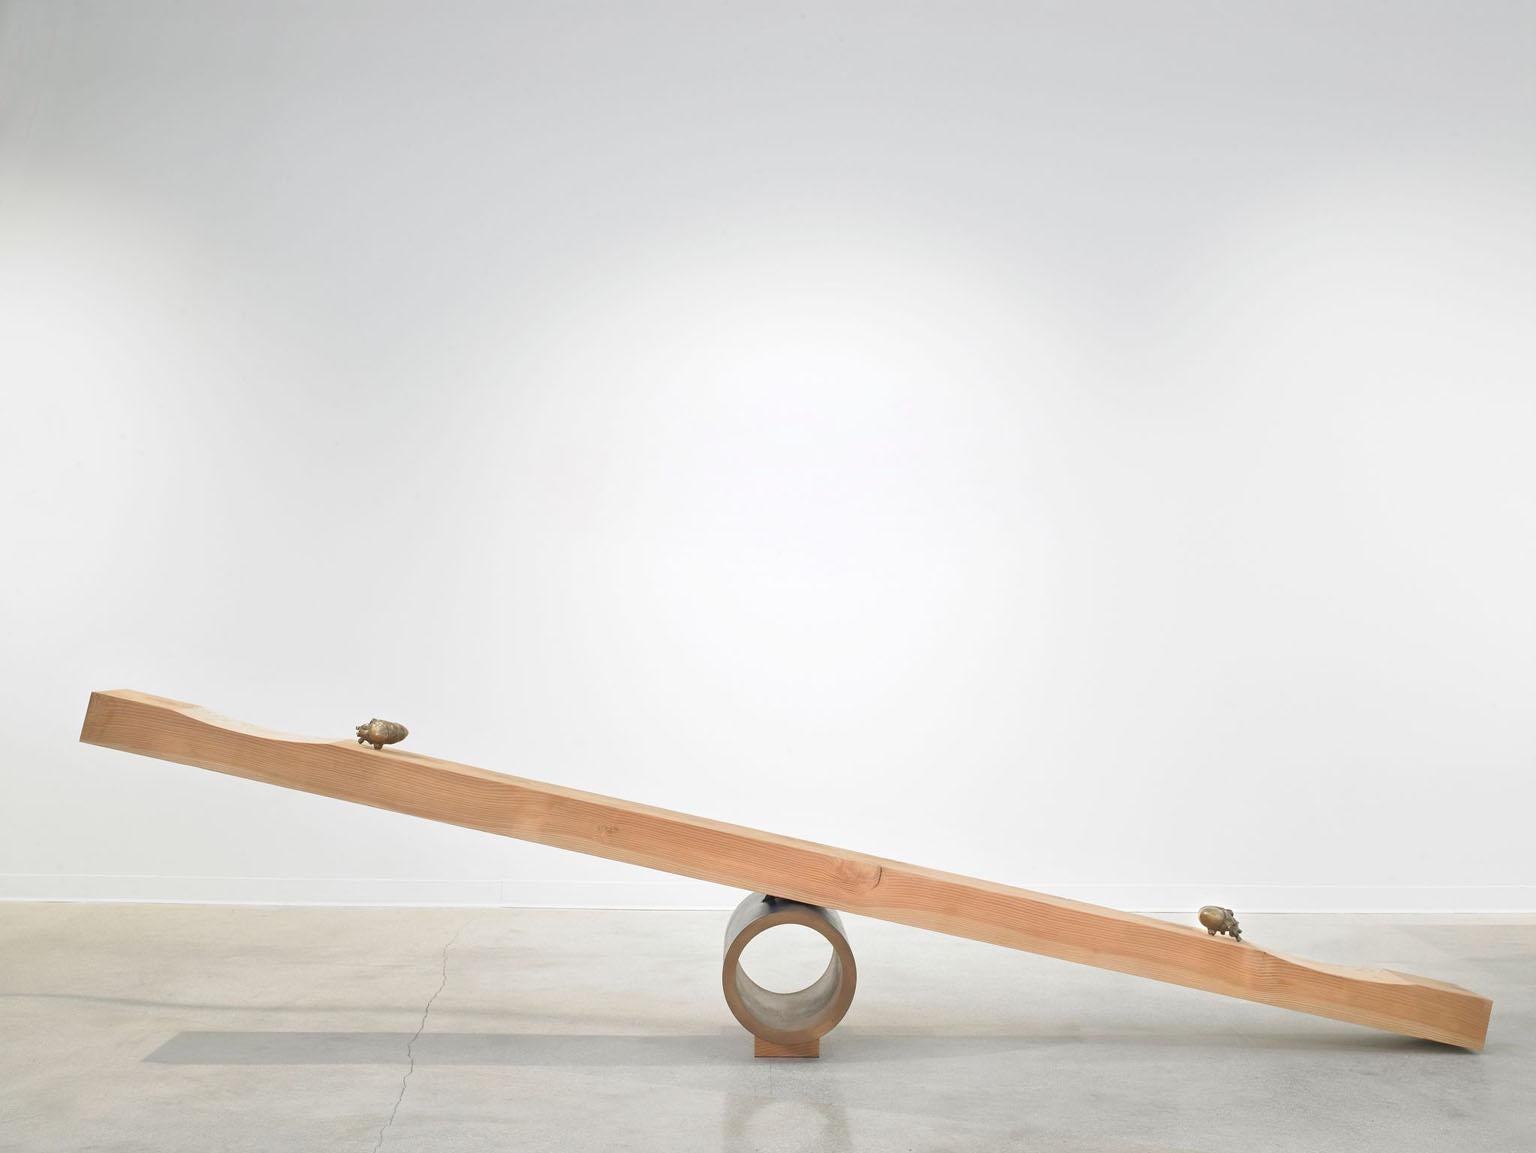 Giddy-up see saw by Vivian Carbonell of Carbonell design, a sculpture-trained furniture designer, handcrafted a functioning seesaw, the highlight of ten pieces on view. A chunky slab of Douglas fir timber balances on a dark blue metal pivot and is